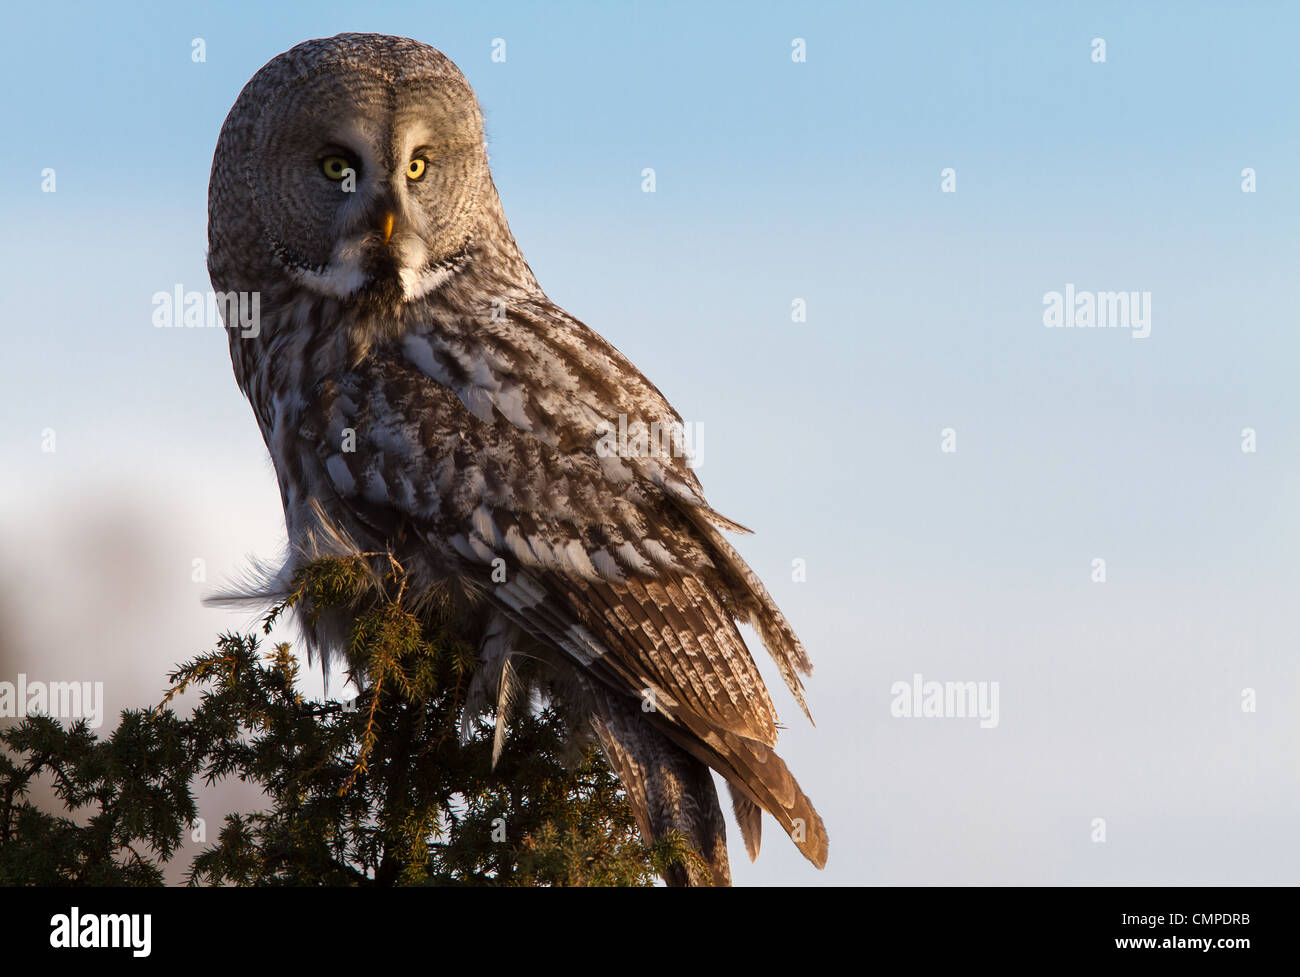 A Great grey owl sitting in a tree Stock Photo